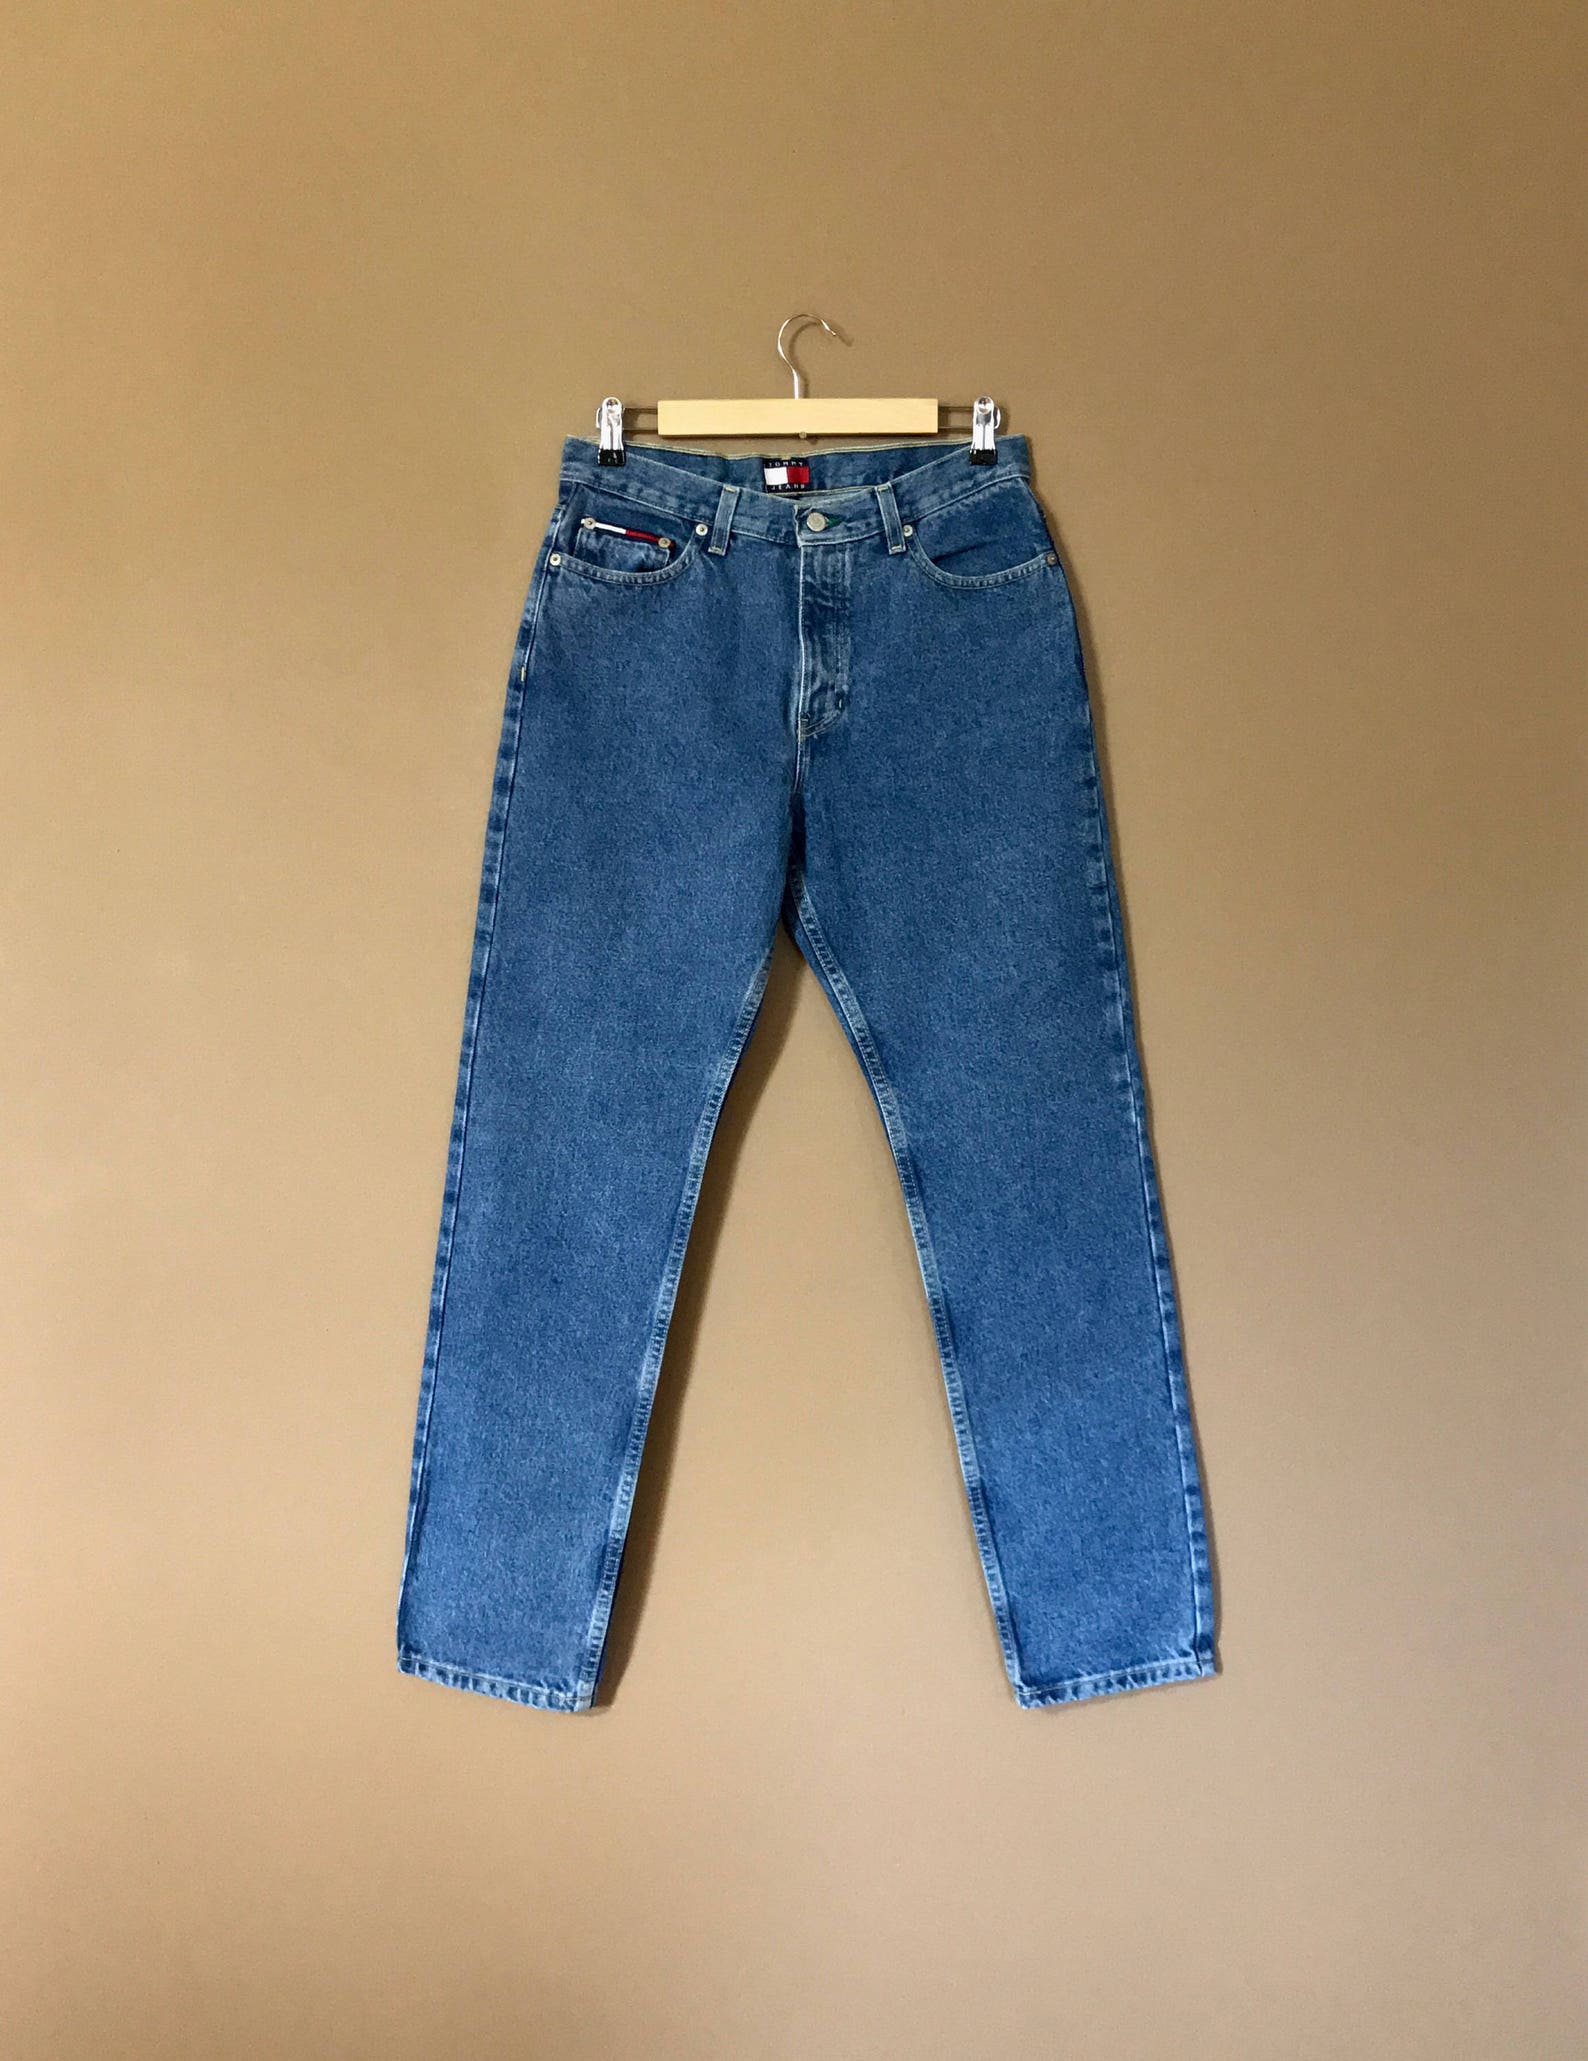 30 Tommy Hilfiger Jeans Vintage / High Waisted Tommy Jeans / - Etsy